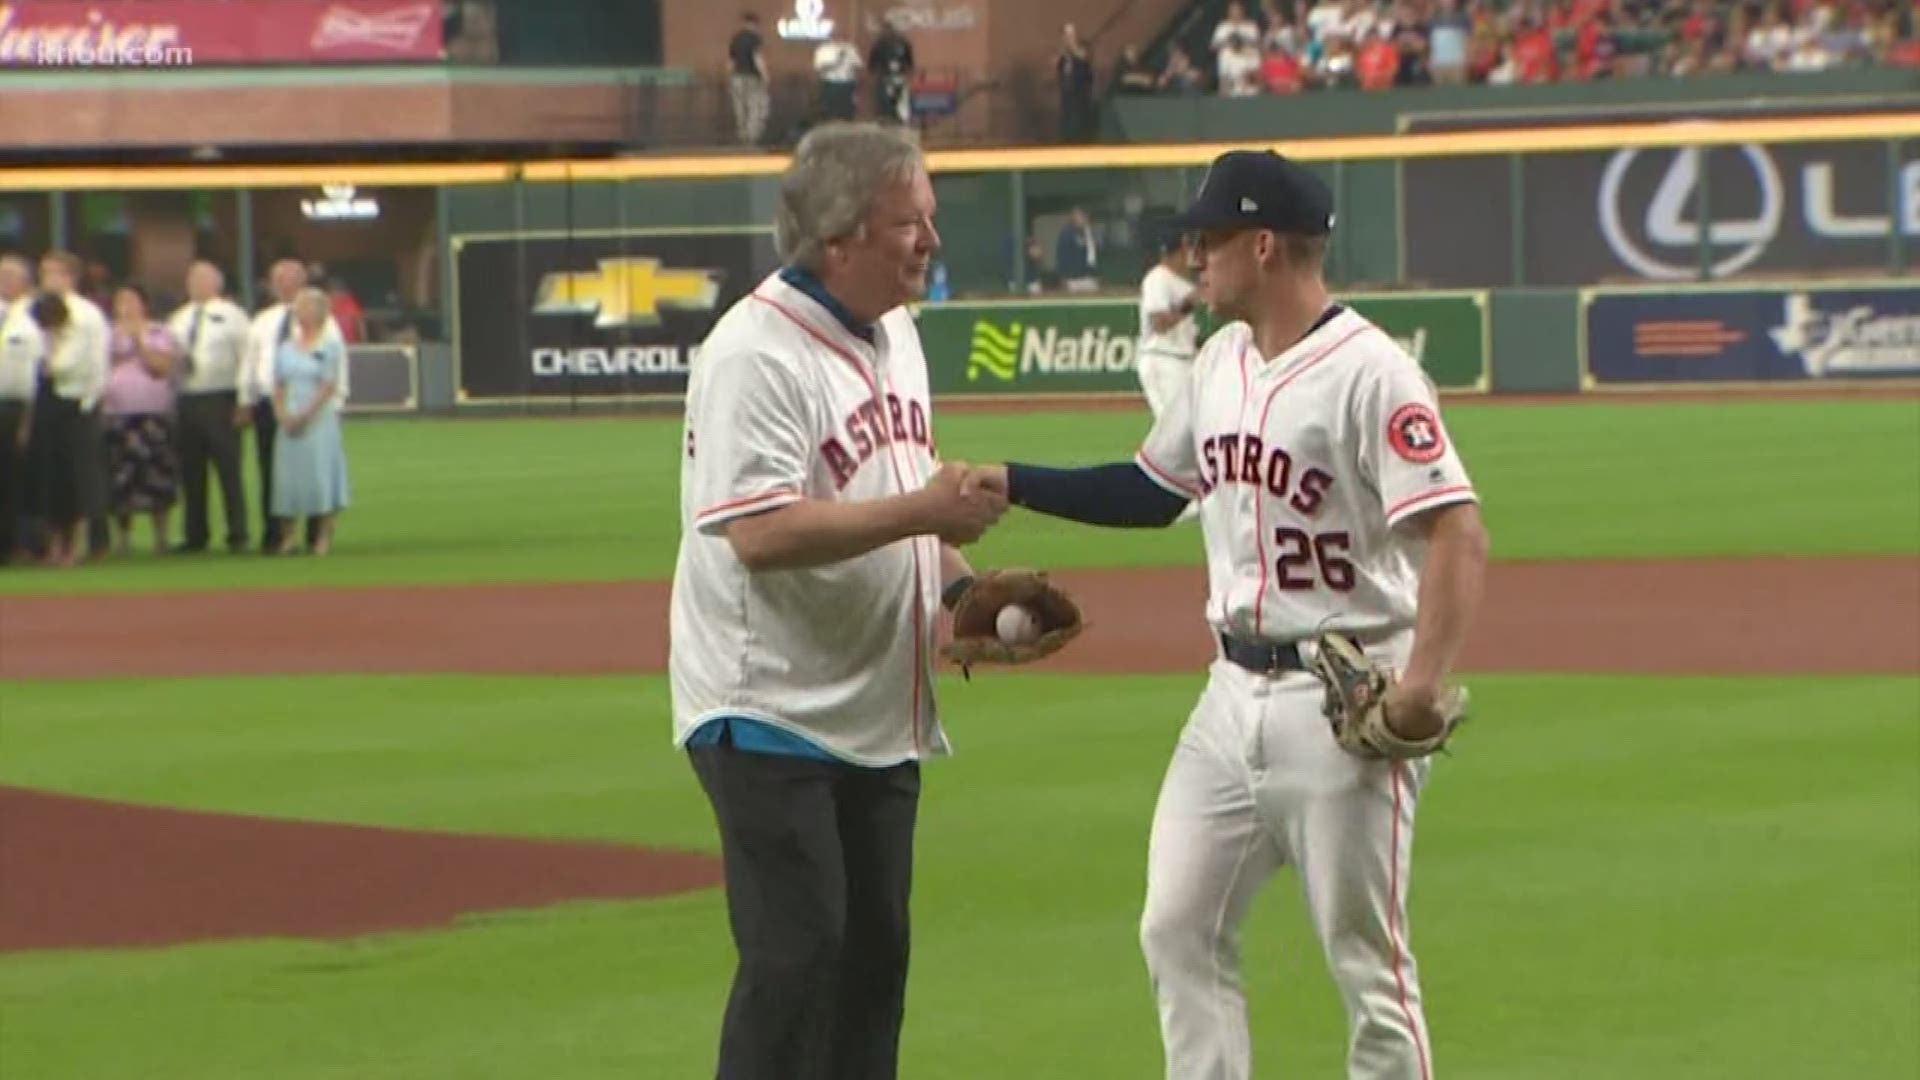 The Astros celebrated the 50th anniversary of the Apollo 11 mission on Monday with 11 runs and a special guest throwing out the first pitch, Neil Armstrong's son, Eric Armstrong.